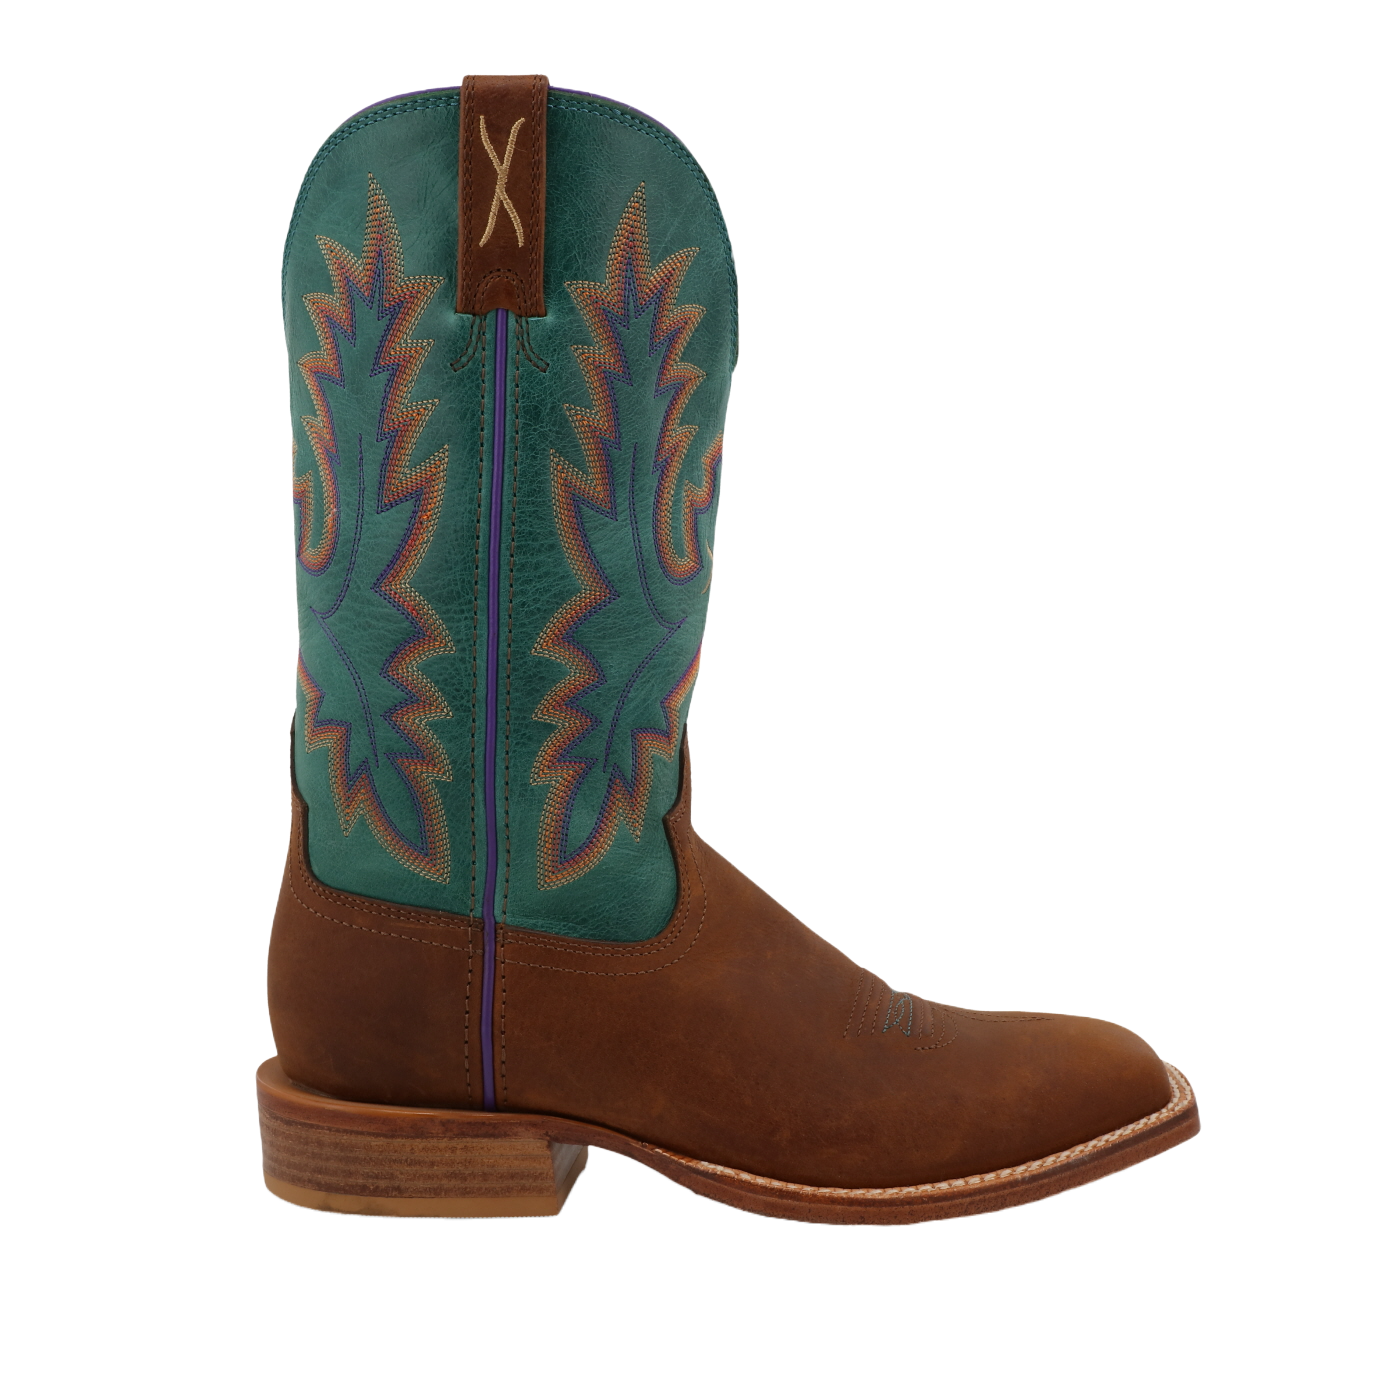 Twisted X Ladies Tech X Cinnamon & Turquoise Square Toe Boots  WXTL001